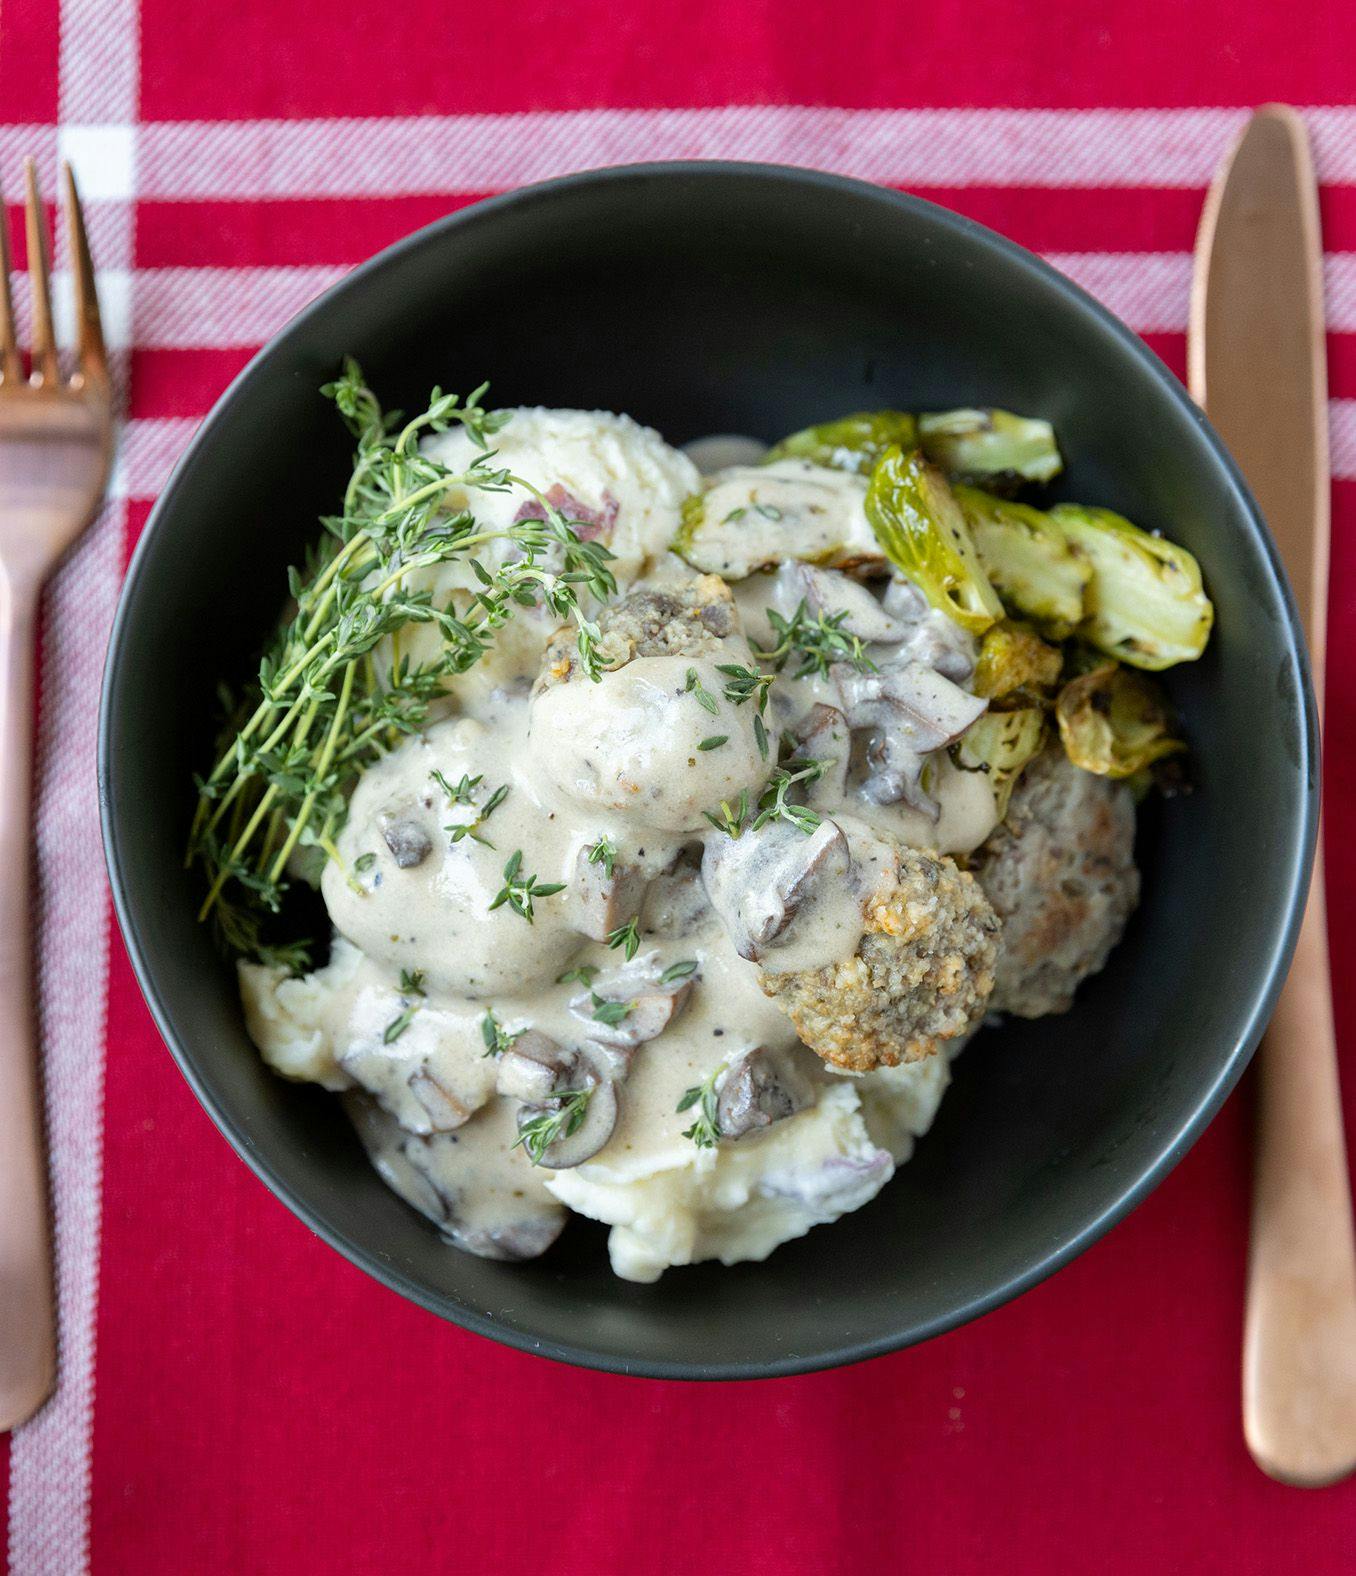 A bowl of potatoes and Swedish meatballs on a table